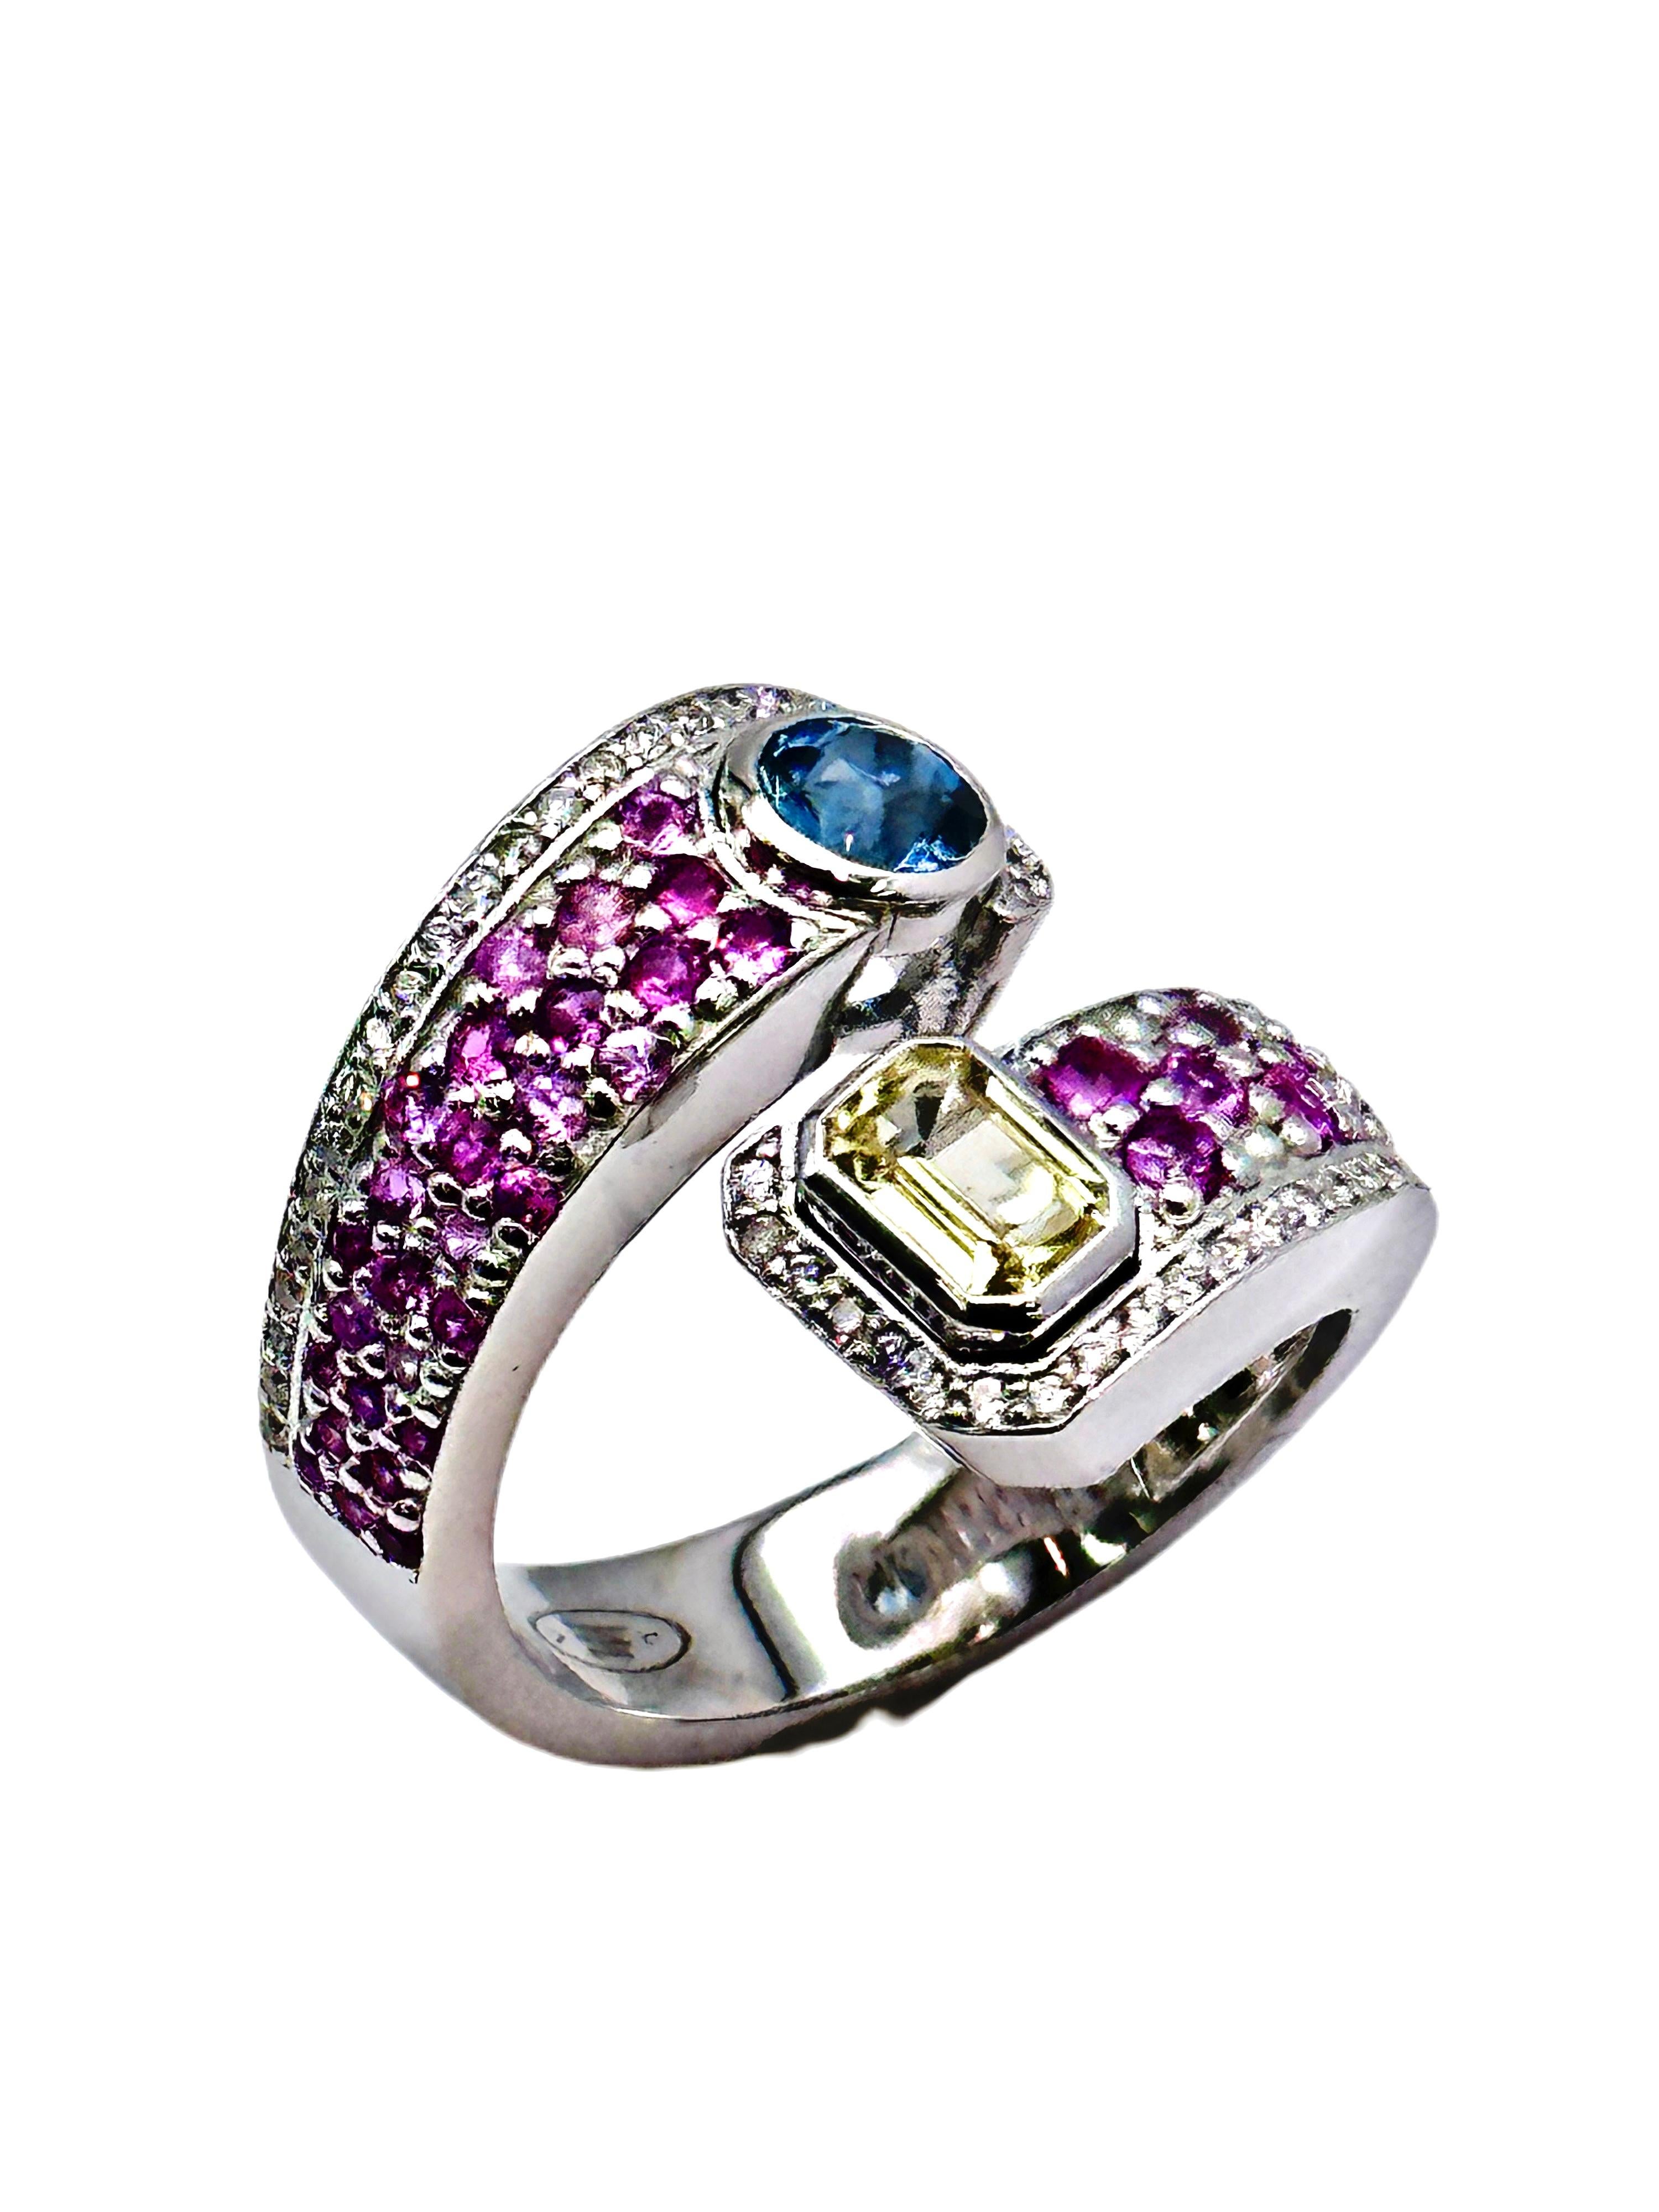 For Sale:  14K White Gold Citrine and Blue Topaz Dual Cut Bypass Ring 3